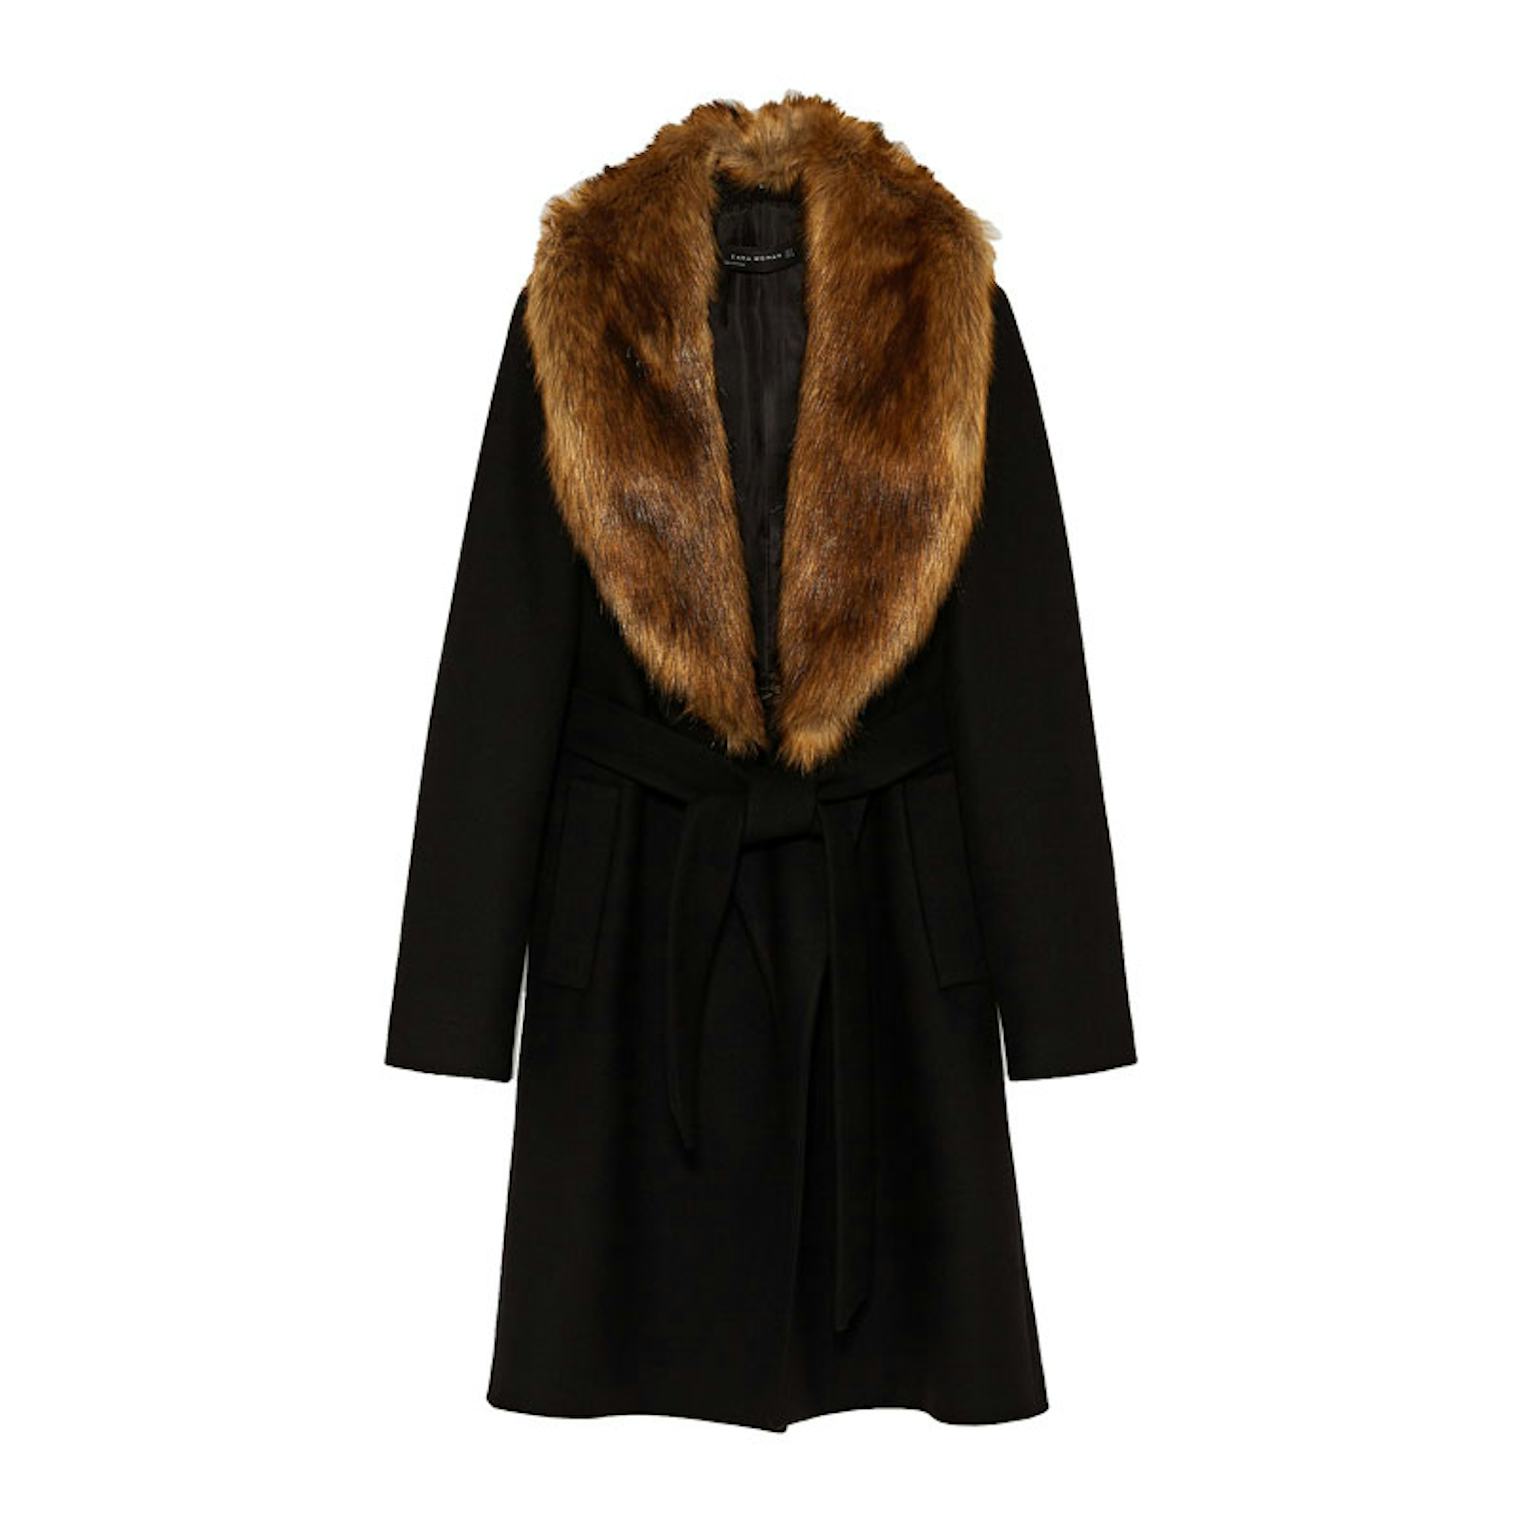 Gorgeous Evening Coats To Wear With Your Holiday Attire